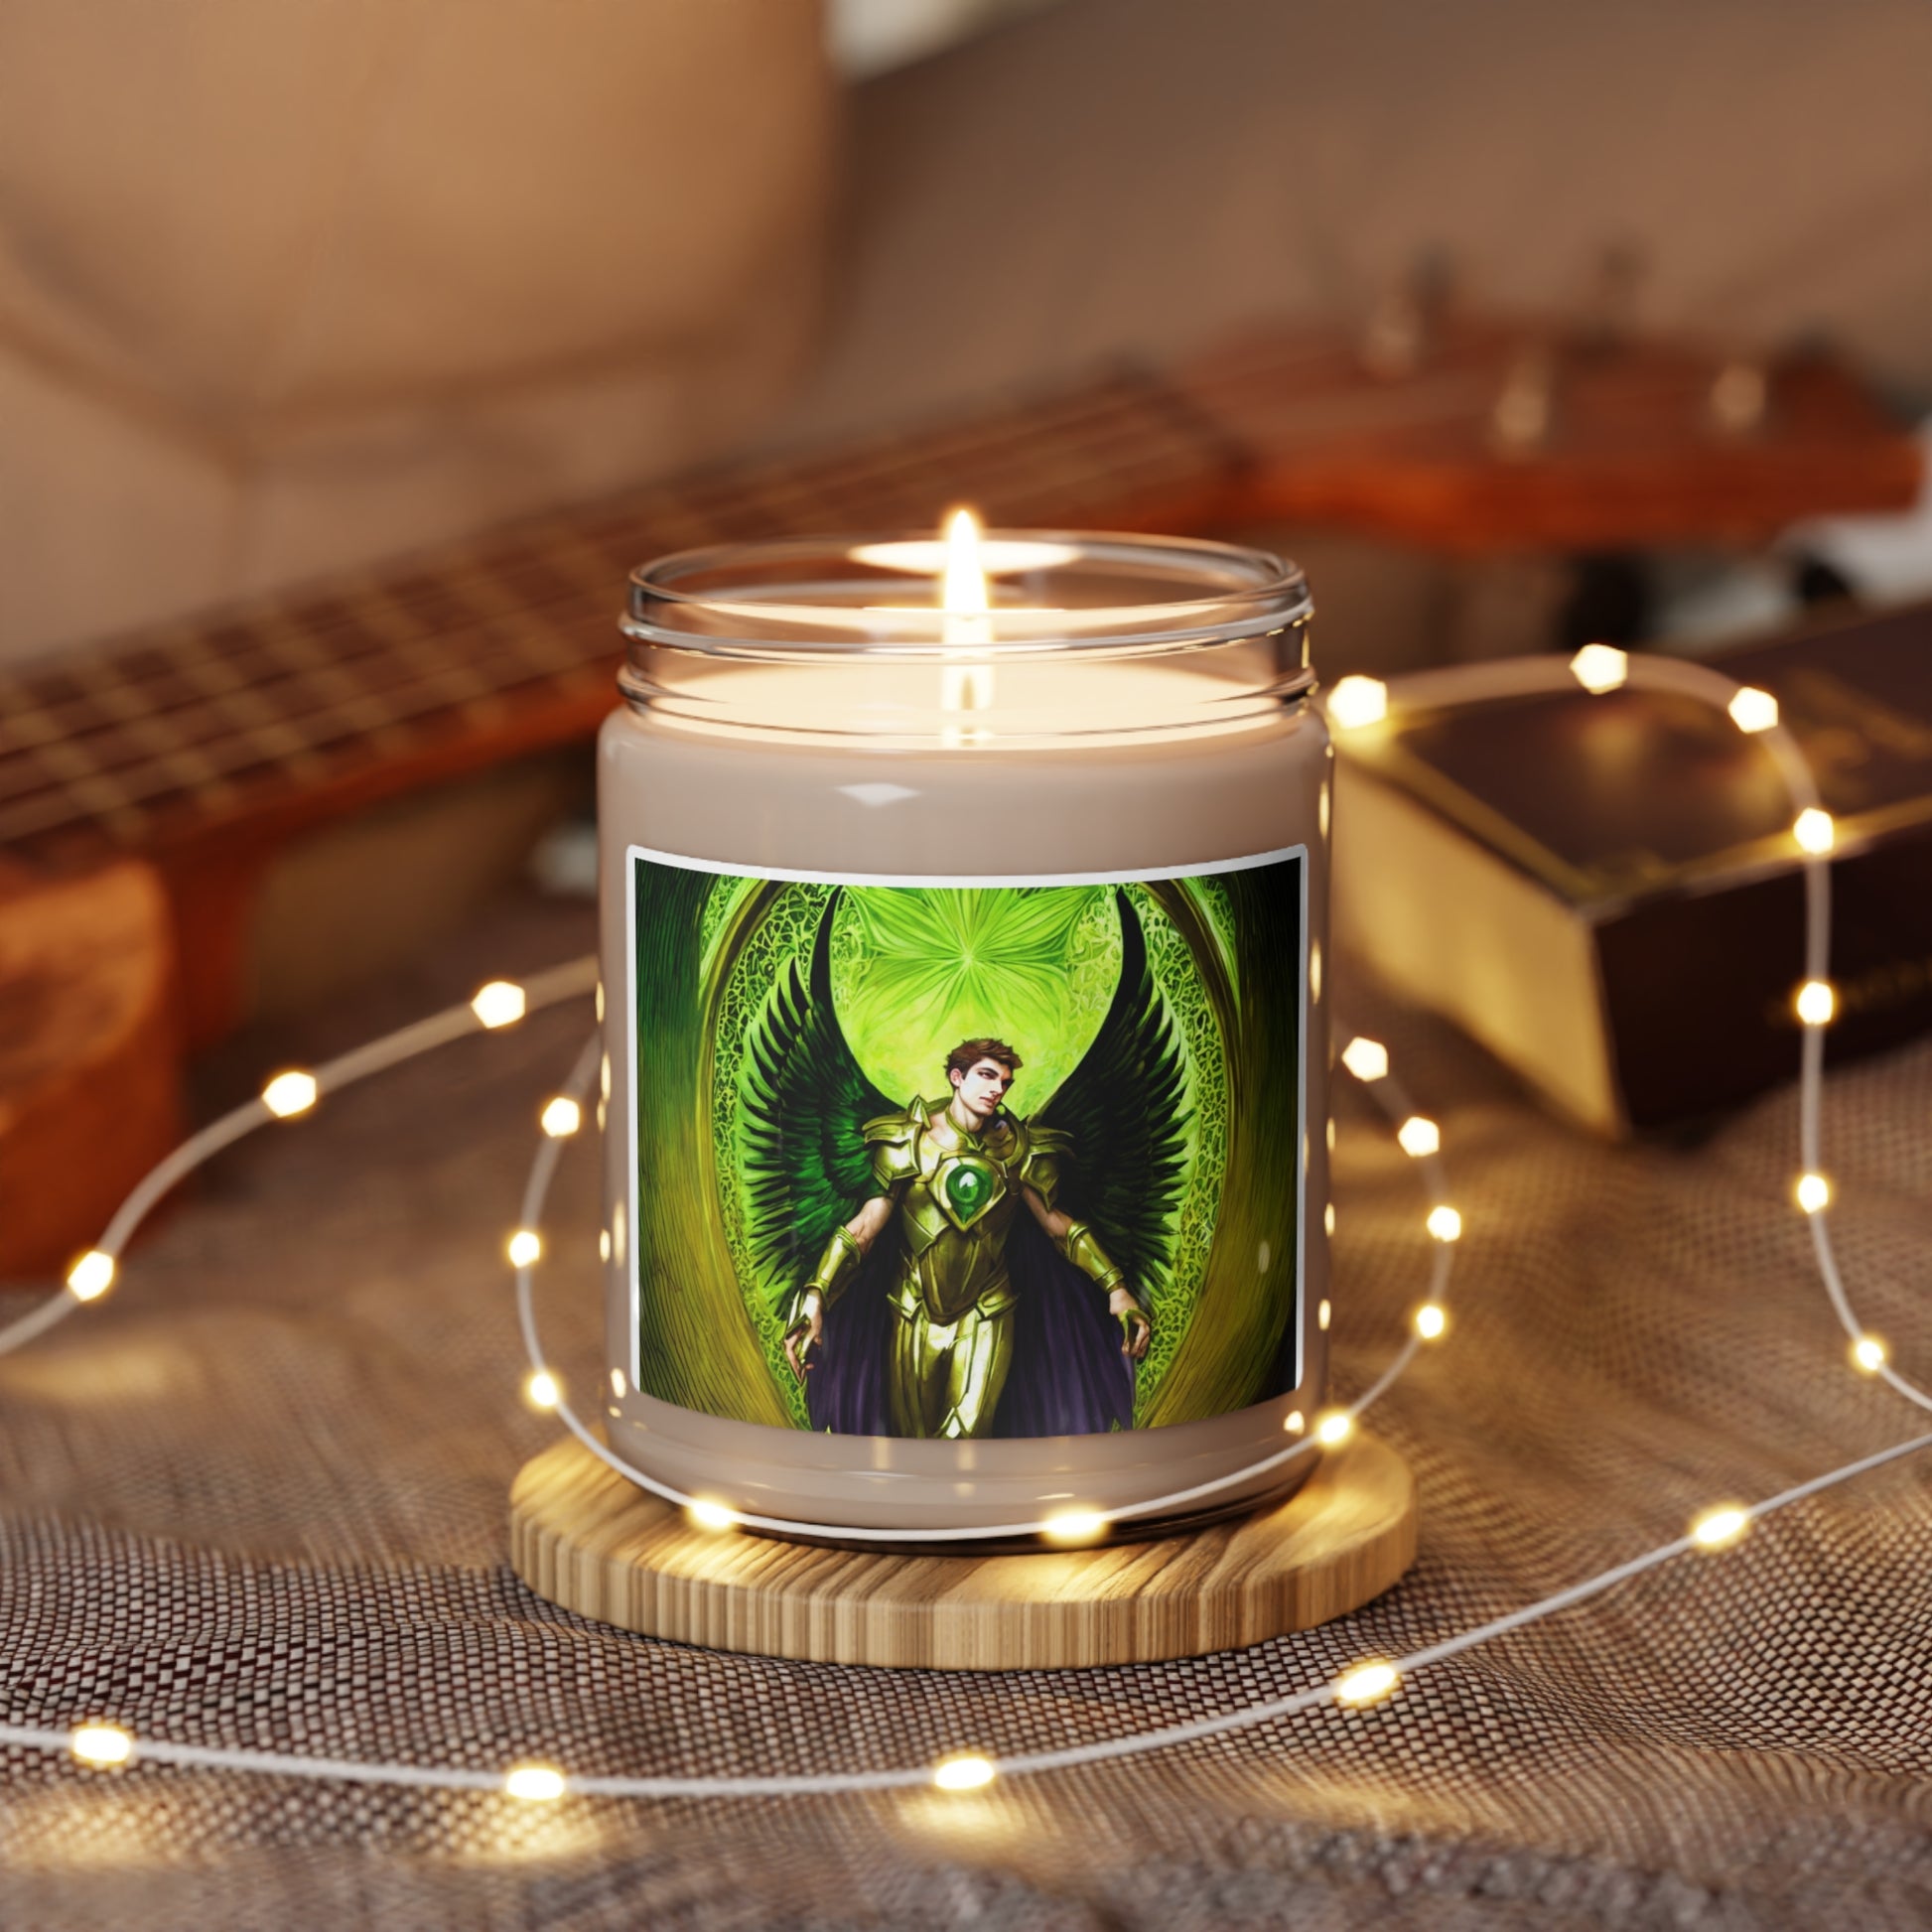 Archangel Raphael Scented Soy Candle for offerings, rituals, initiations or praying and meditation - Angelic Thrones: Your Gateway to the Angelic Realms